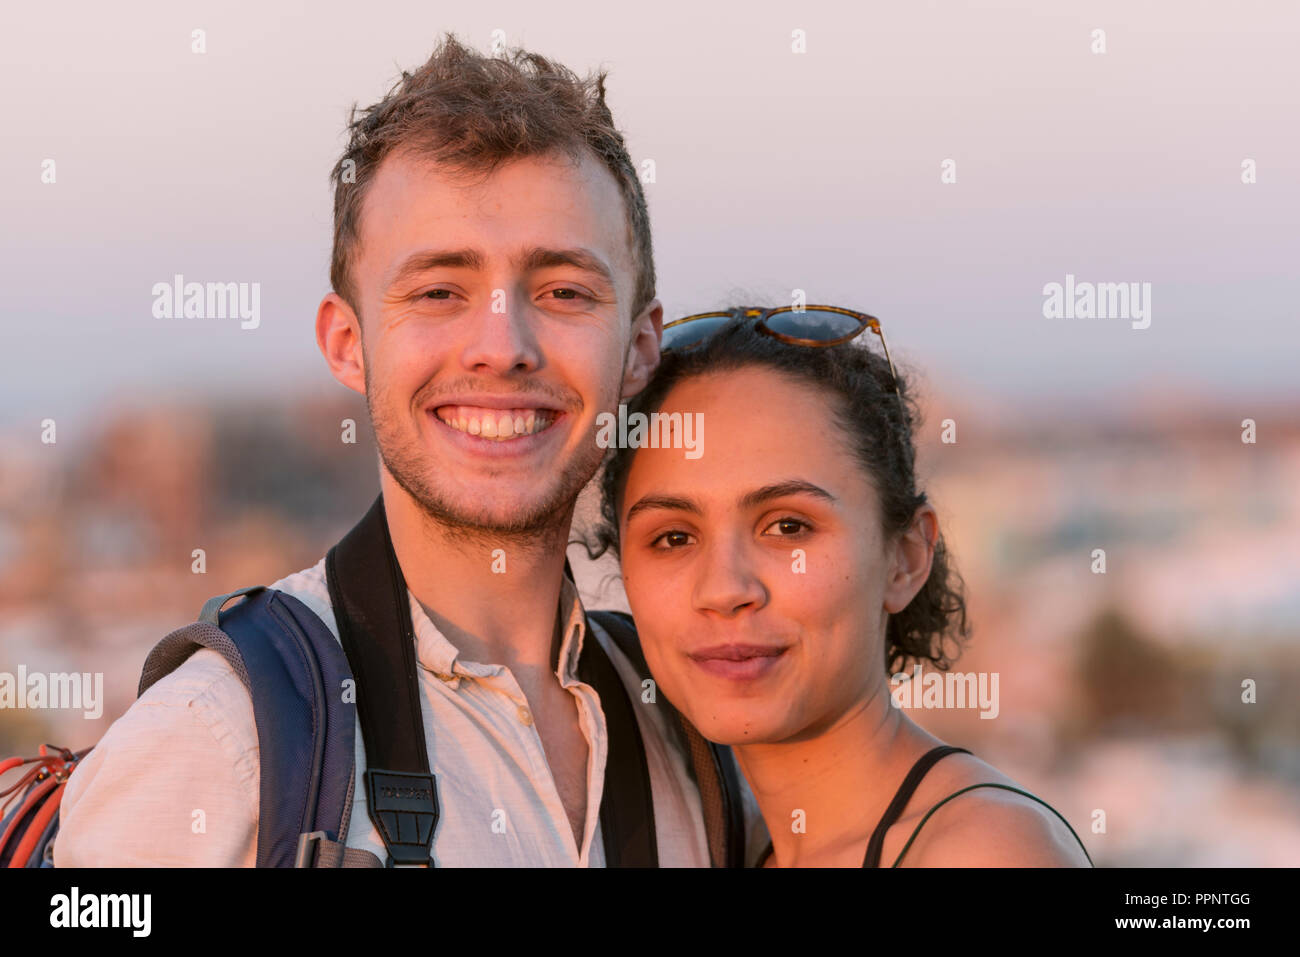 Laughing young woman and young man looking into the camera, couple, Plaza de la Encarnacion, Seville, Andalusia, Spain Stock Photo